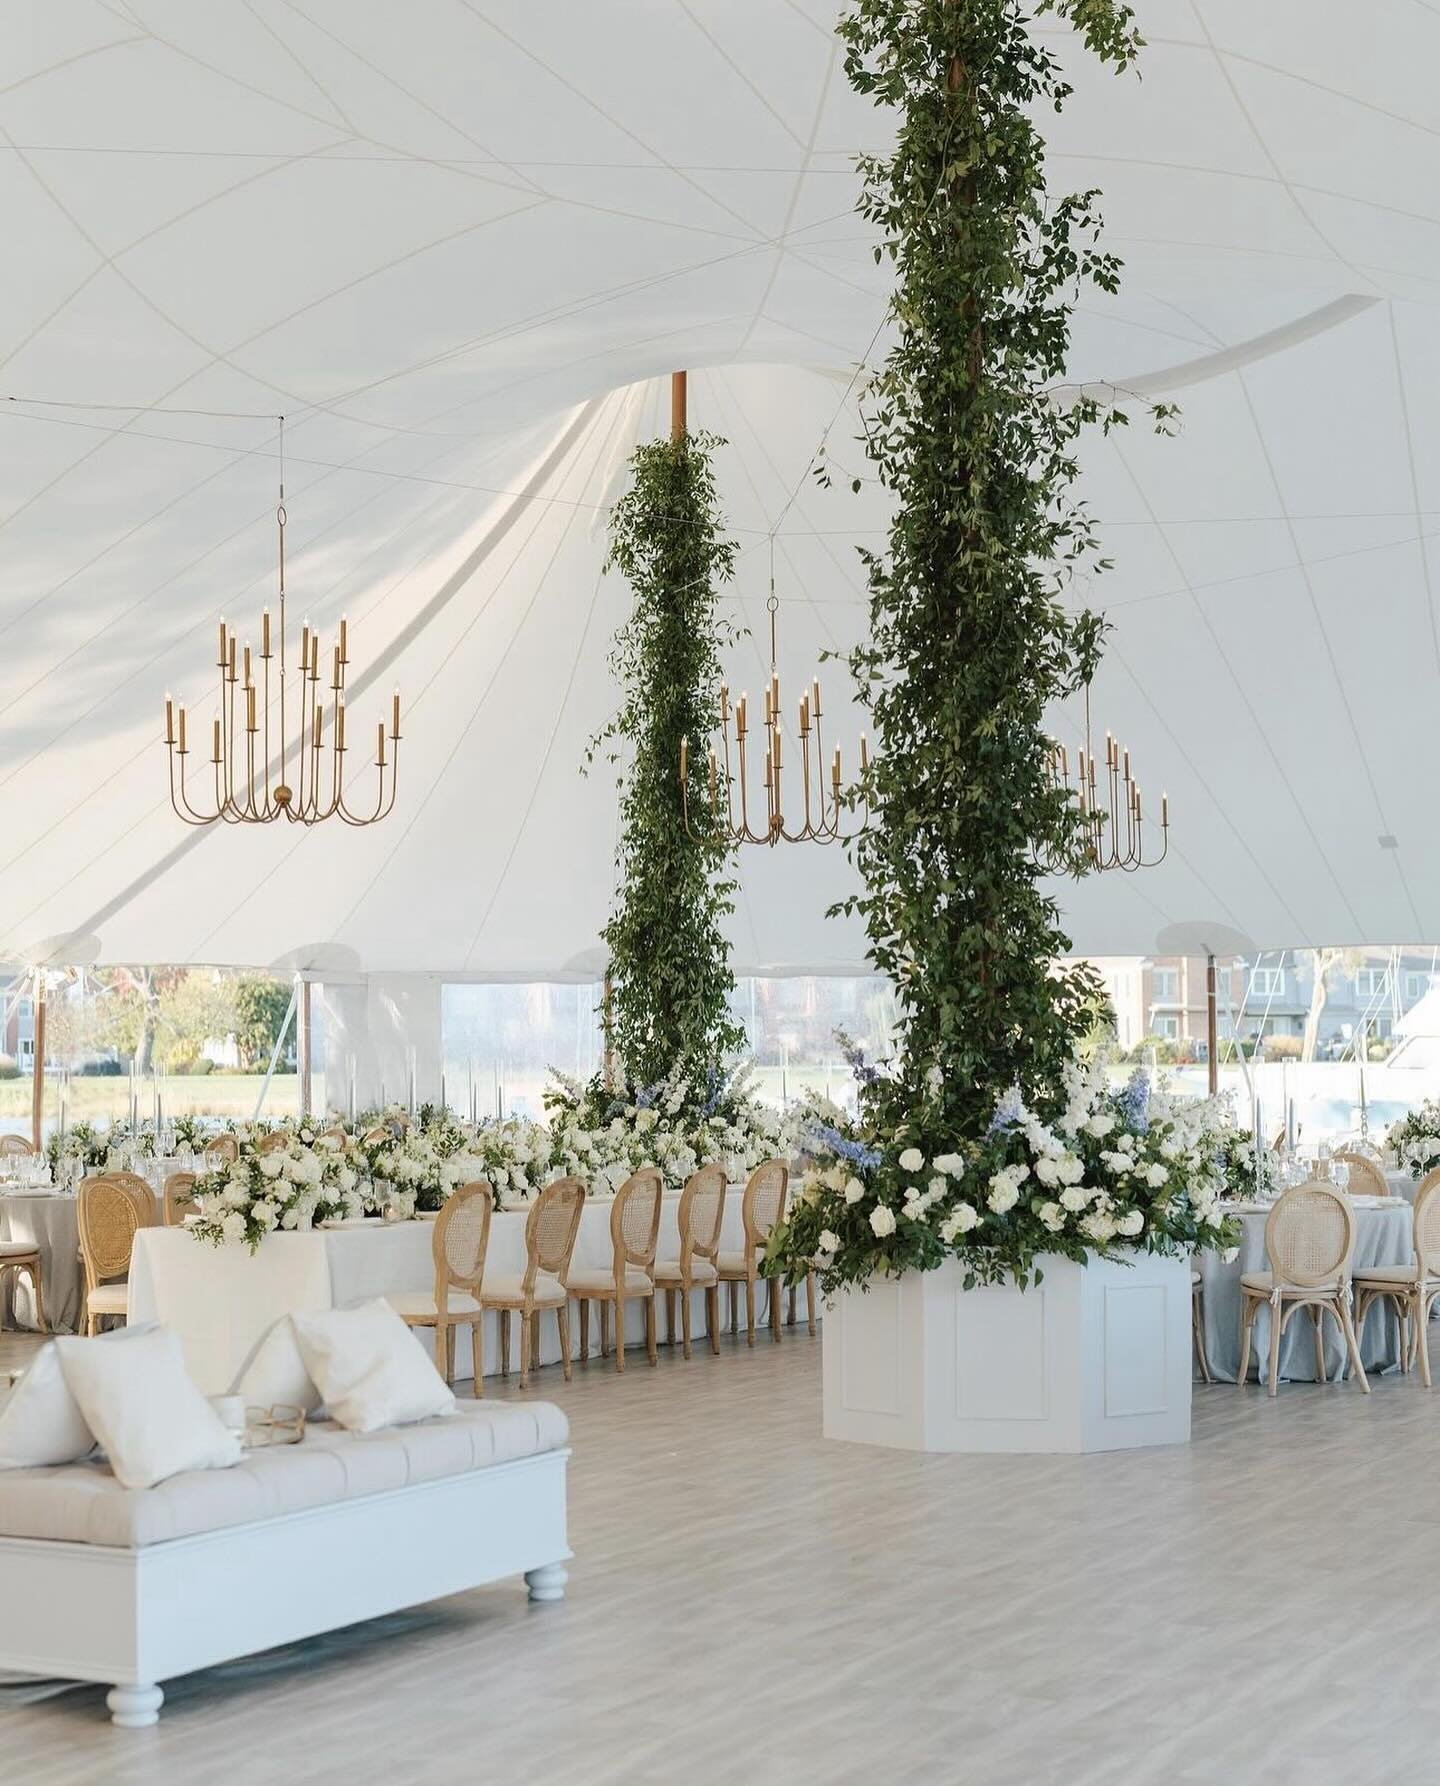 The time for summer weddings is fast approaching, and we&rsquo;re ready for every last dreamy drop of it.

Planning &amp; Design: @kaririderevents
Florals &amp; Decor: @amaryllisinc 
Photographer: @lauragordon
Tent: @easternshoretents
Rentals: @white